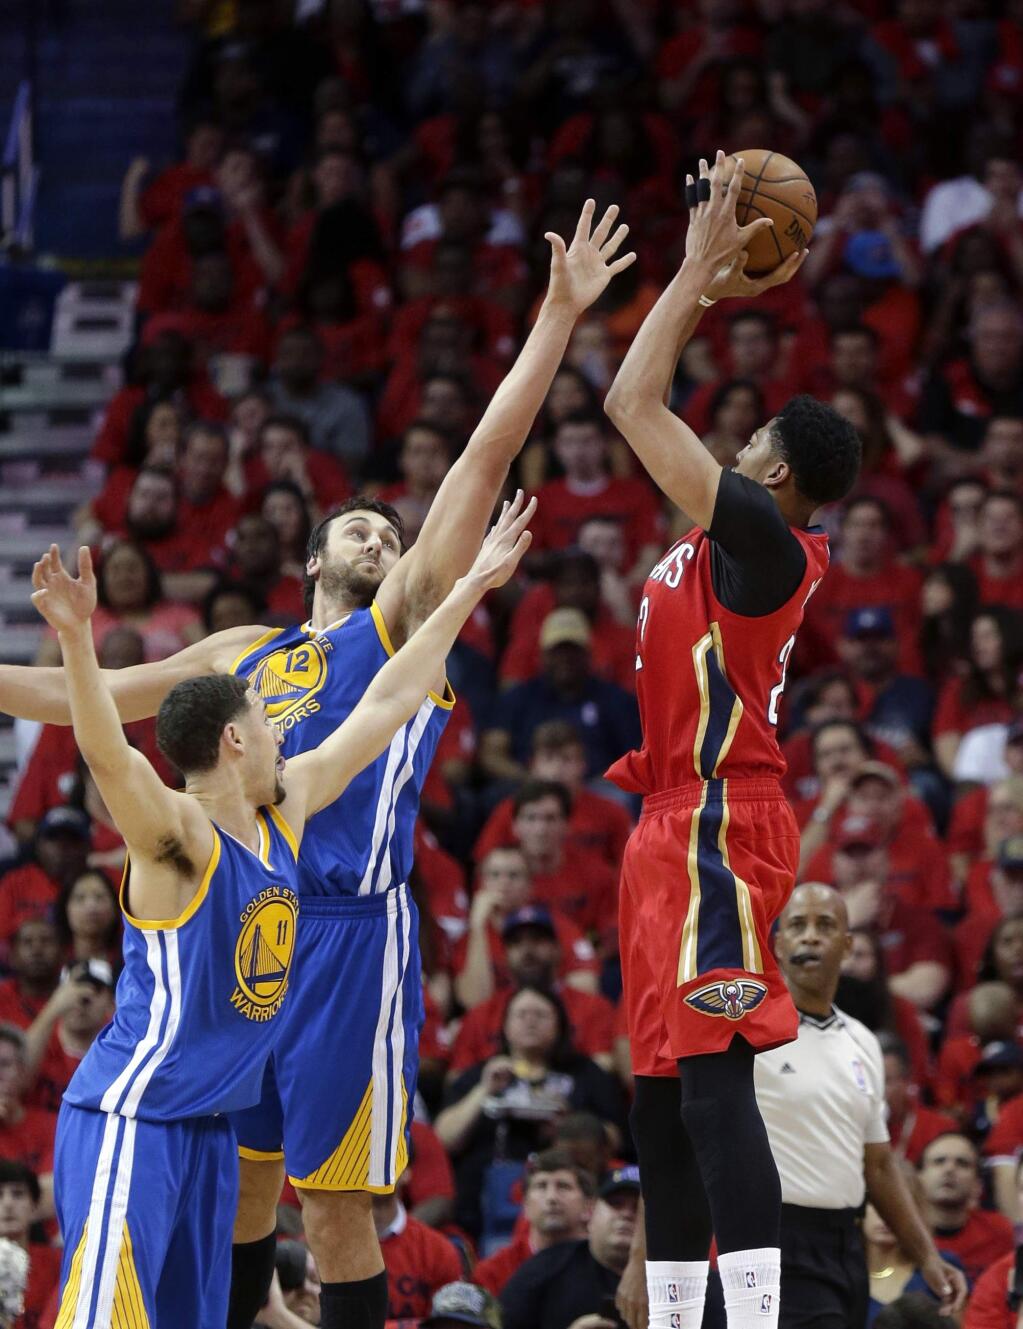 New Orleans Pelicans forward Anthony Davis (23) shoots against Golden State Warriors center Andrew Bogut and guard Klay Thompson, bottom left, during the first half of Game 3 of a first-round NBA basketball playoff series Thursday, April 23, 2015, in New Orleans. (AP Photo/Gerald Herbert)